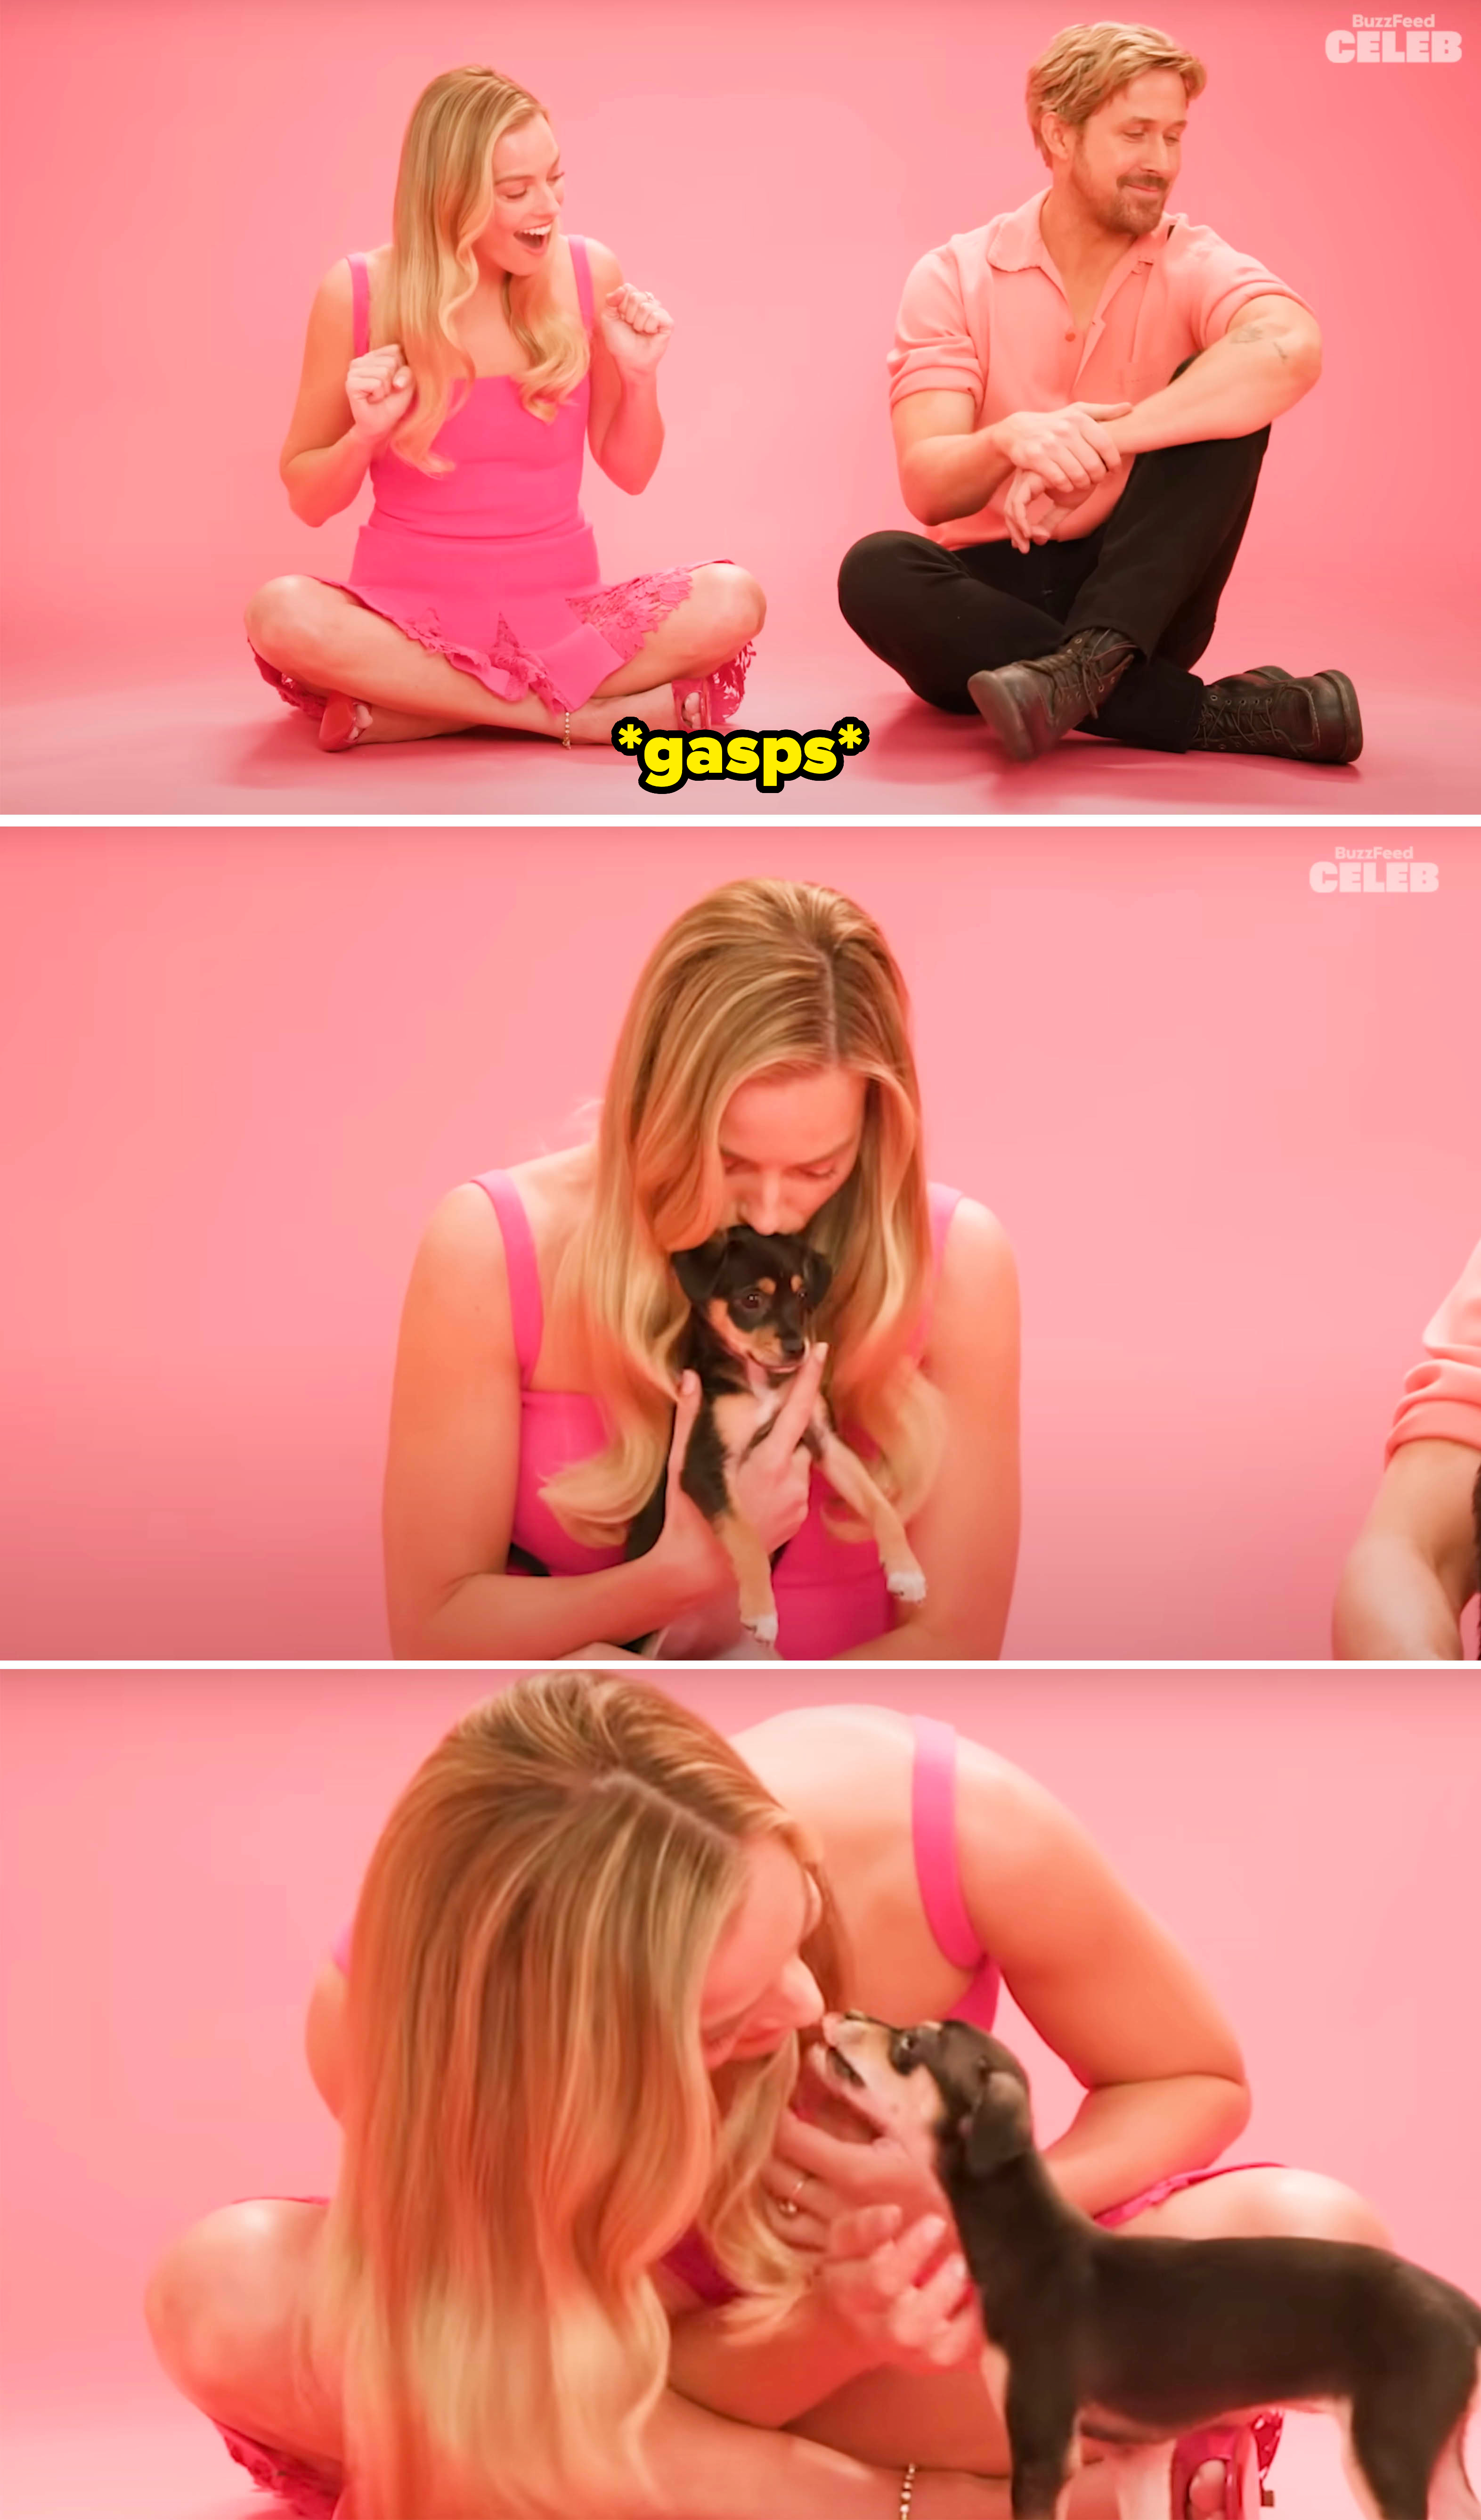 margot playing with puppies